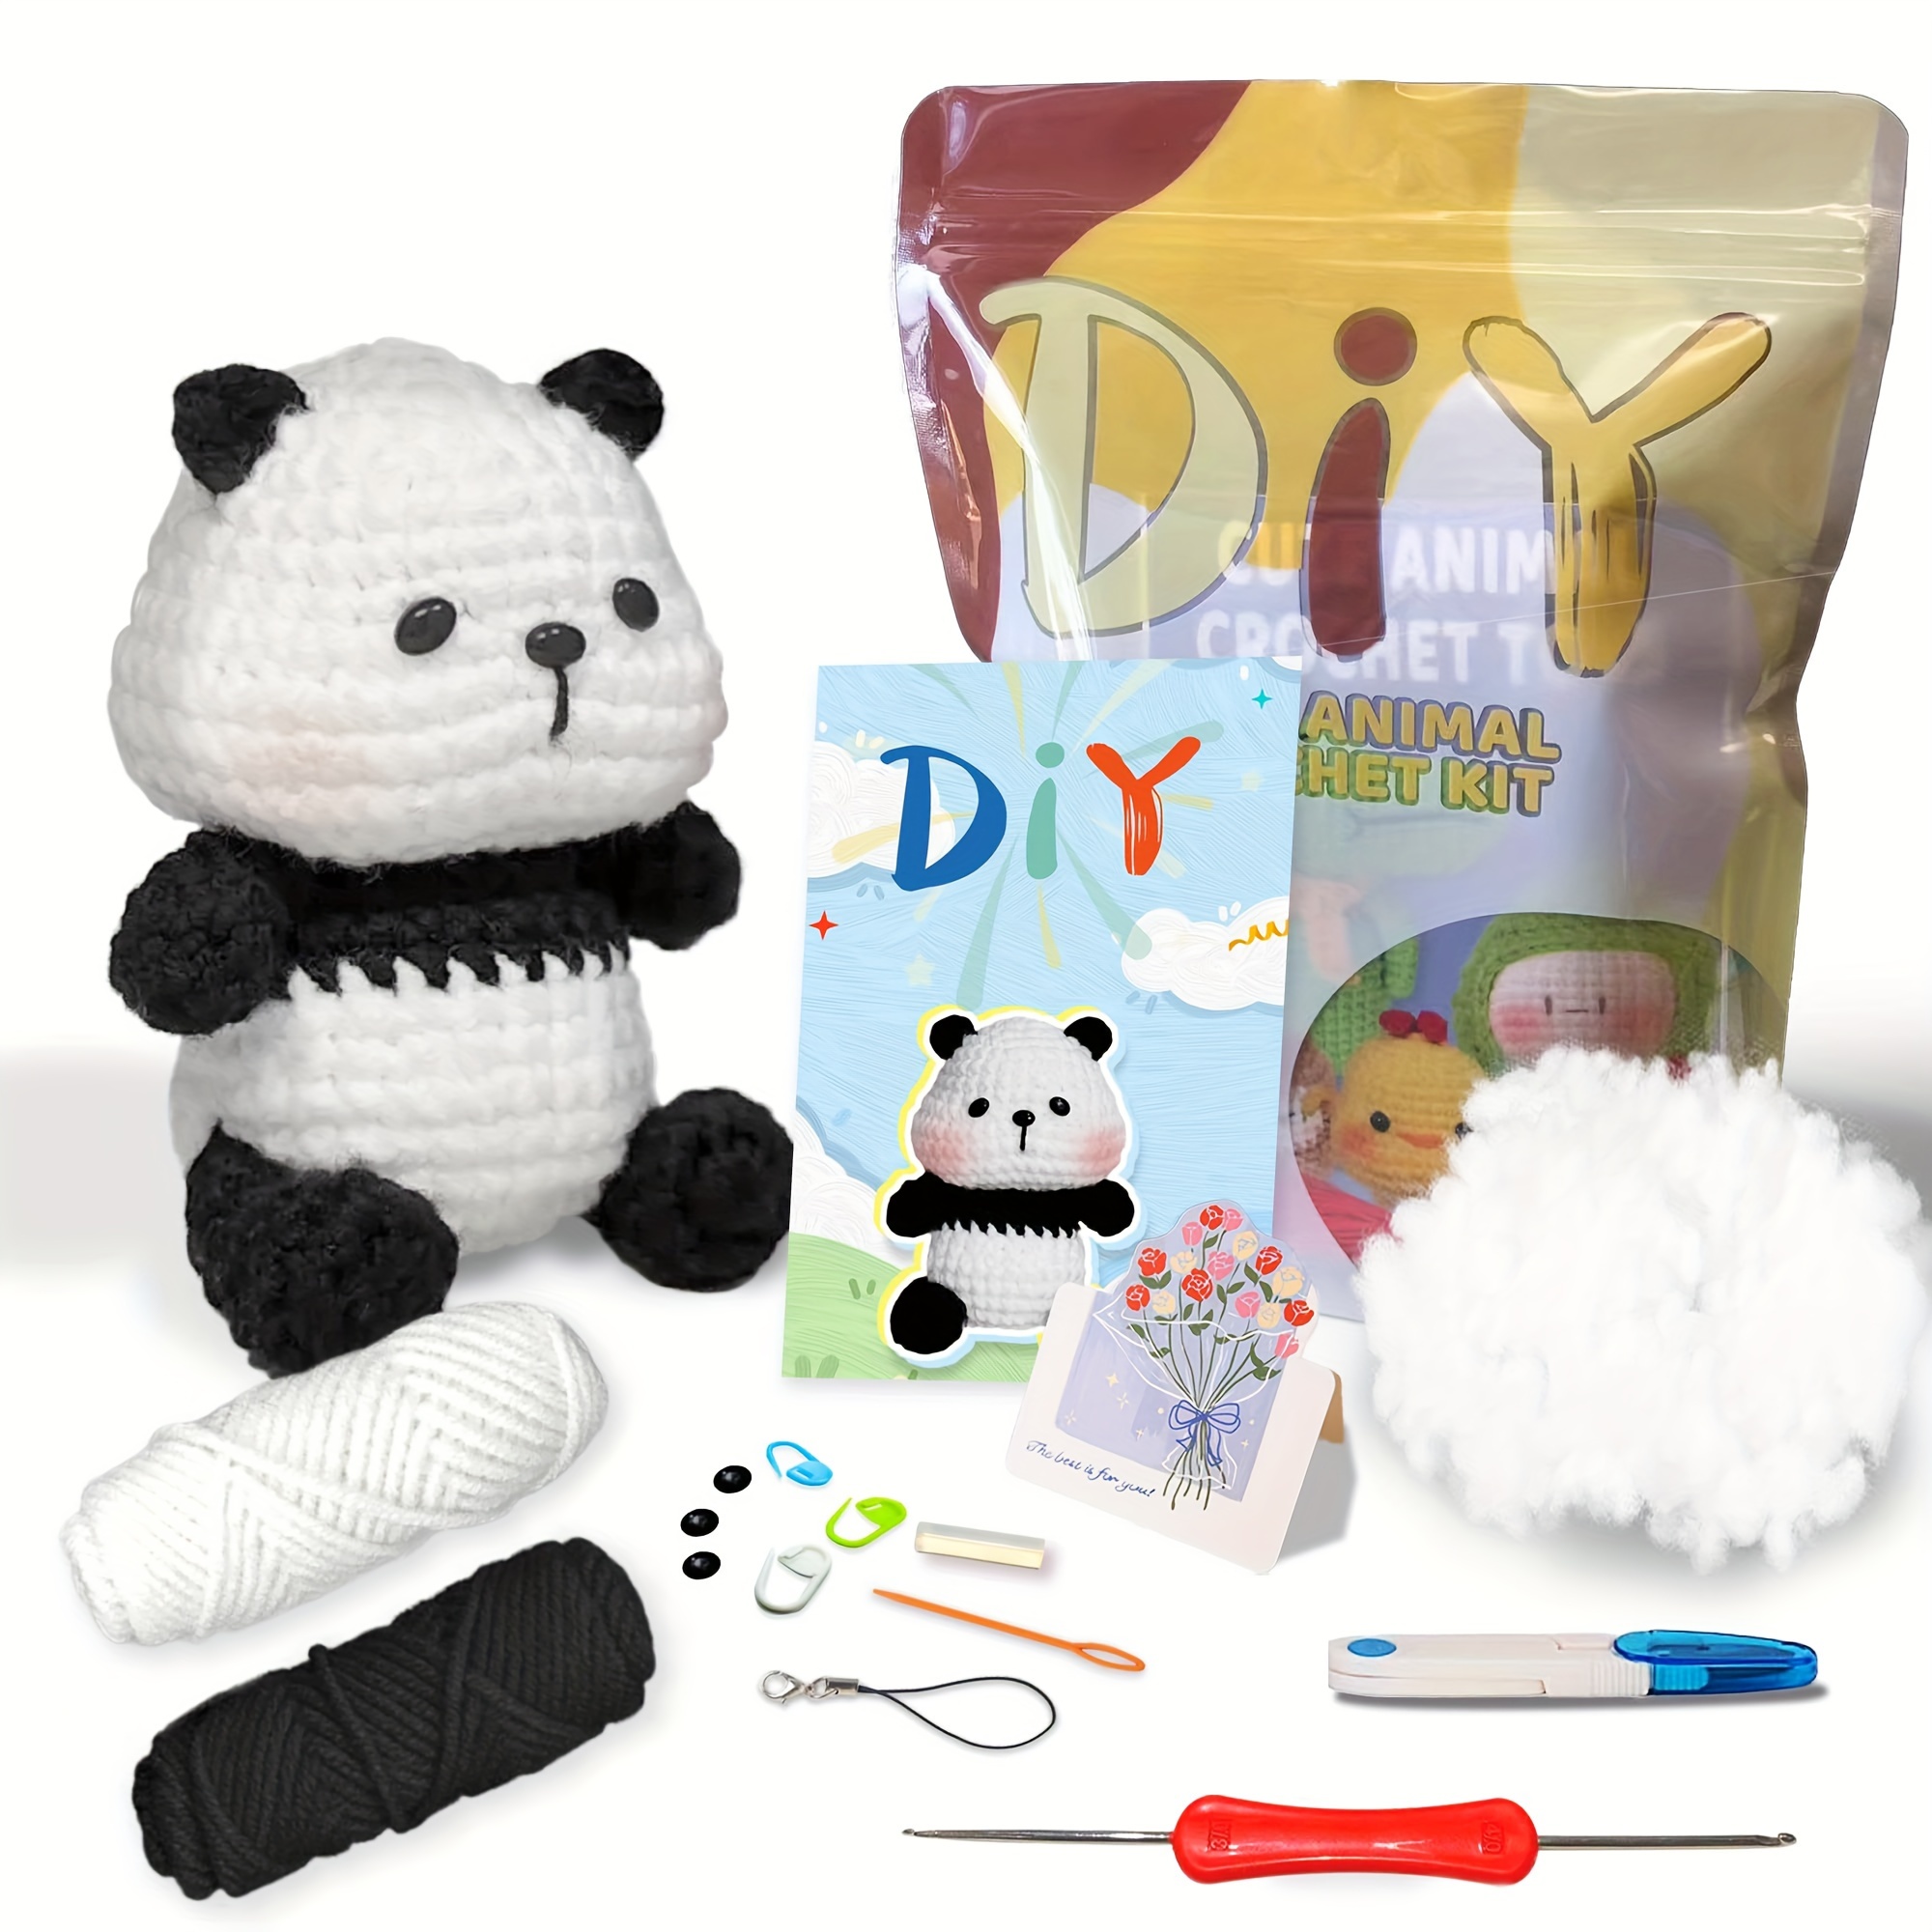 

1pc, panda crochet knitting entry-level set, suitable for beginners and enthusiasts crochet sets, yarn, polyester fiber, seam markers, plastic eyes and instructions, accessories in random colors